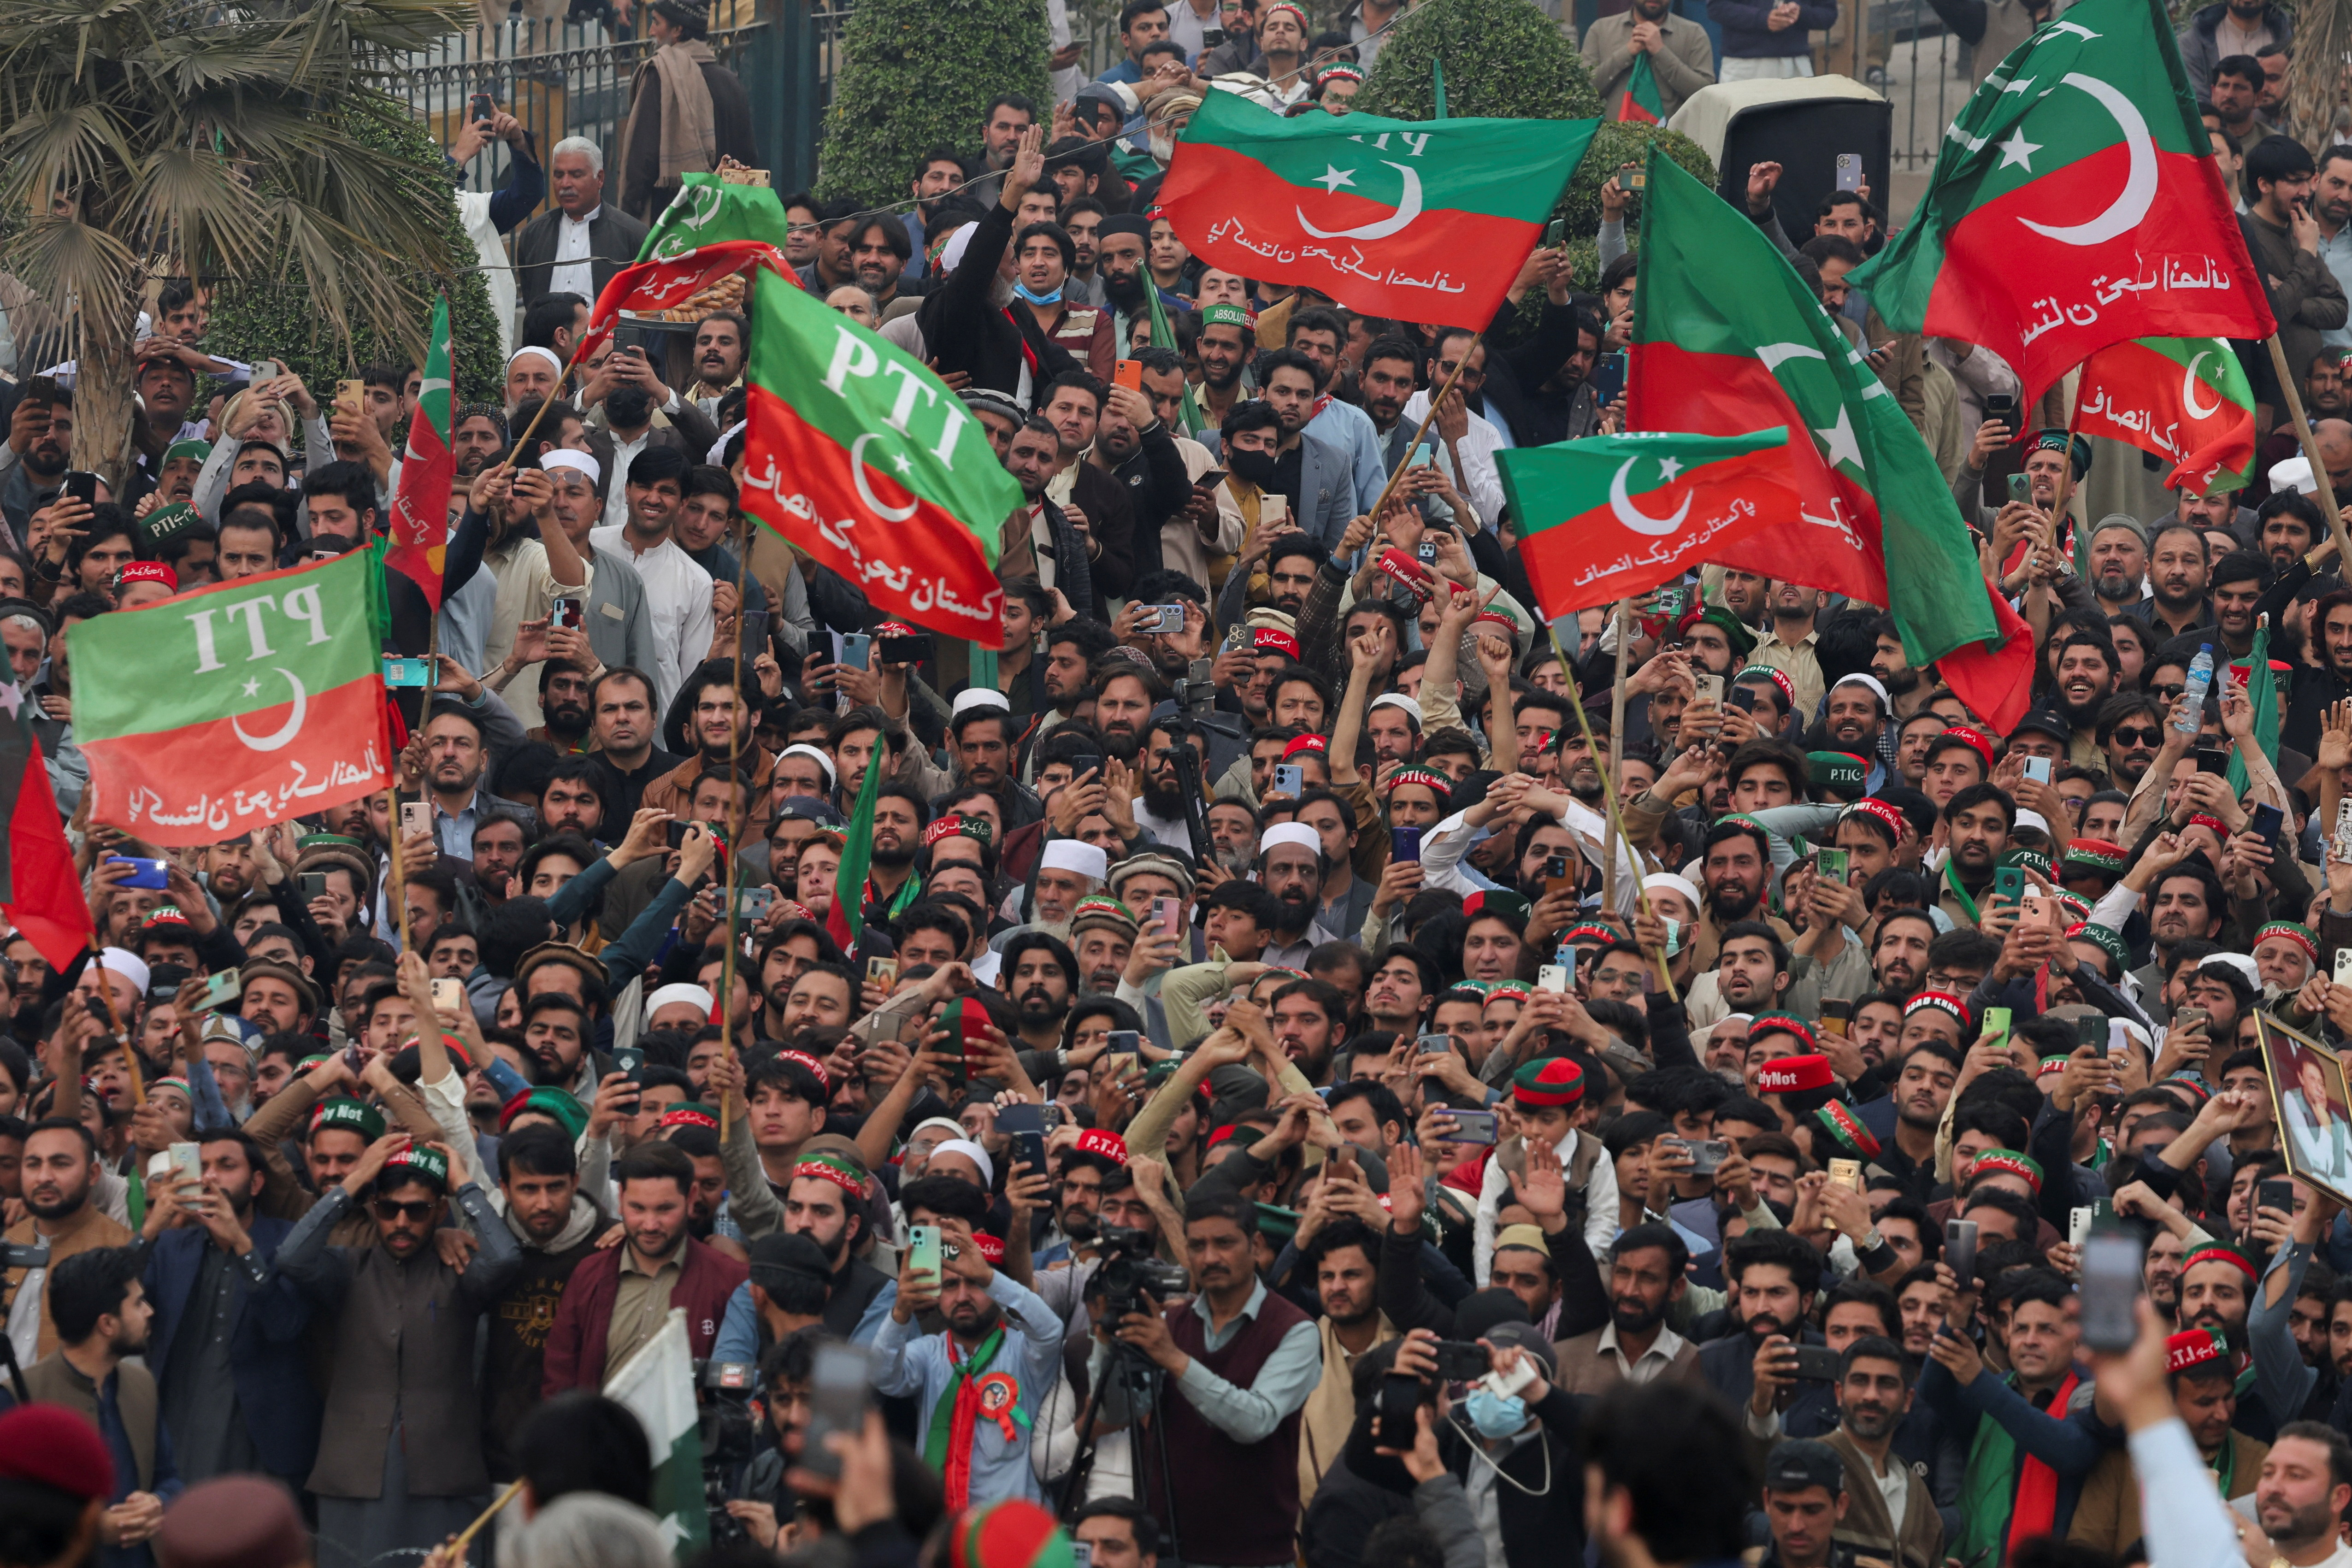 Protest demanding free and fair results of the general elections in Peshawar